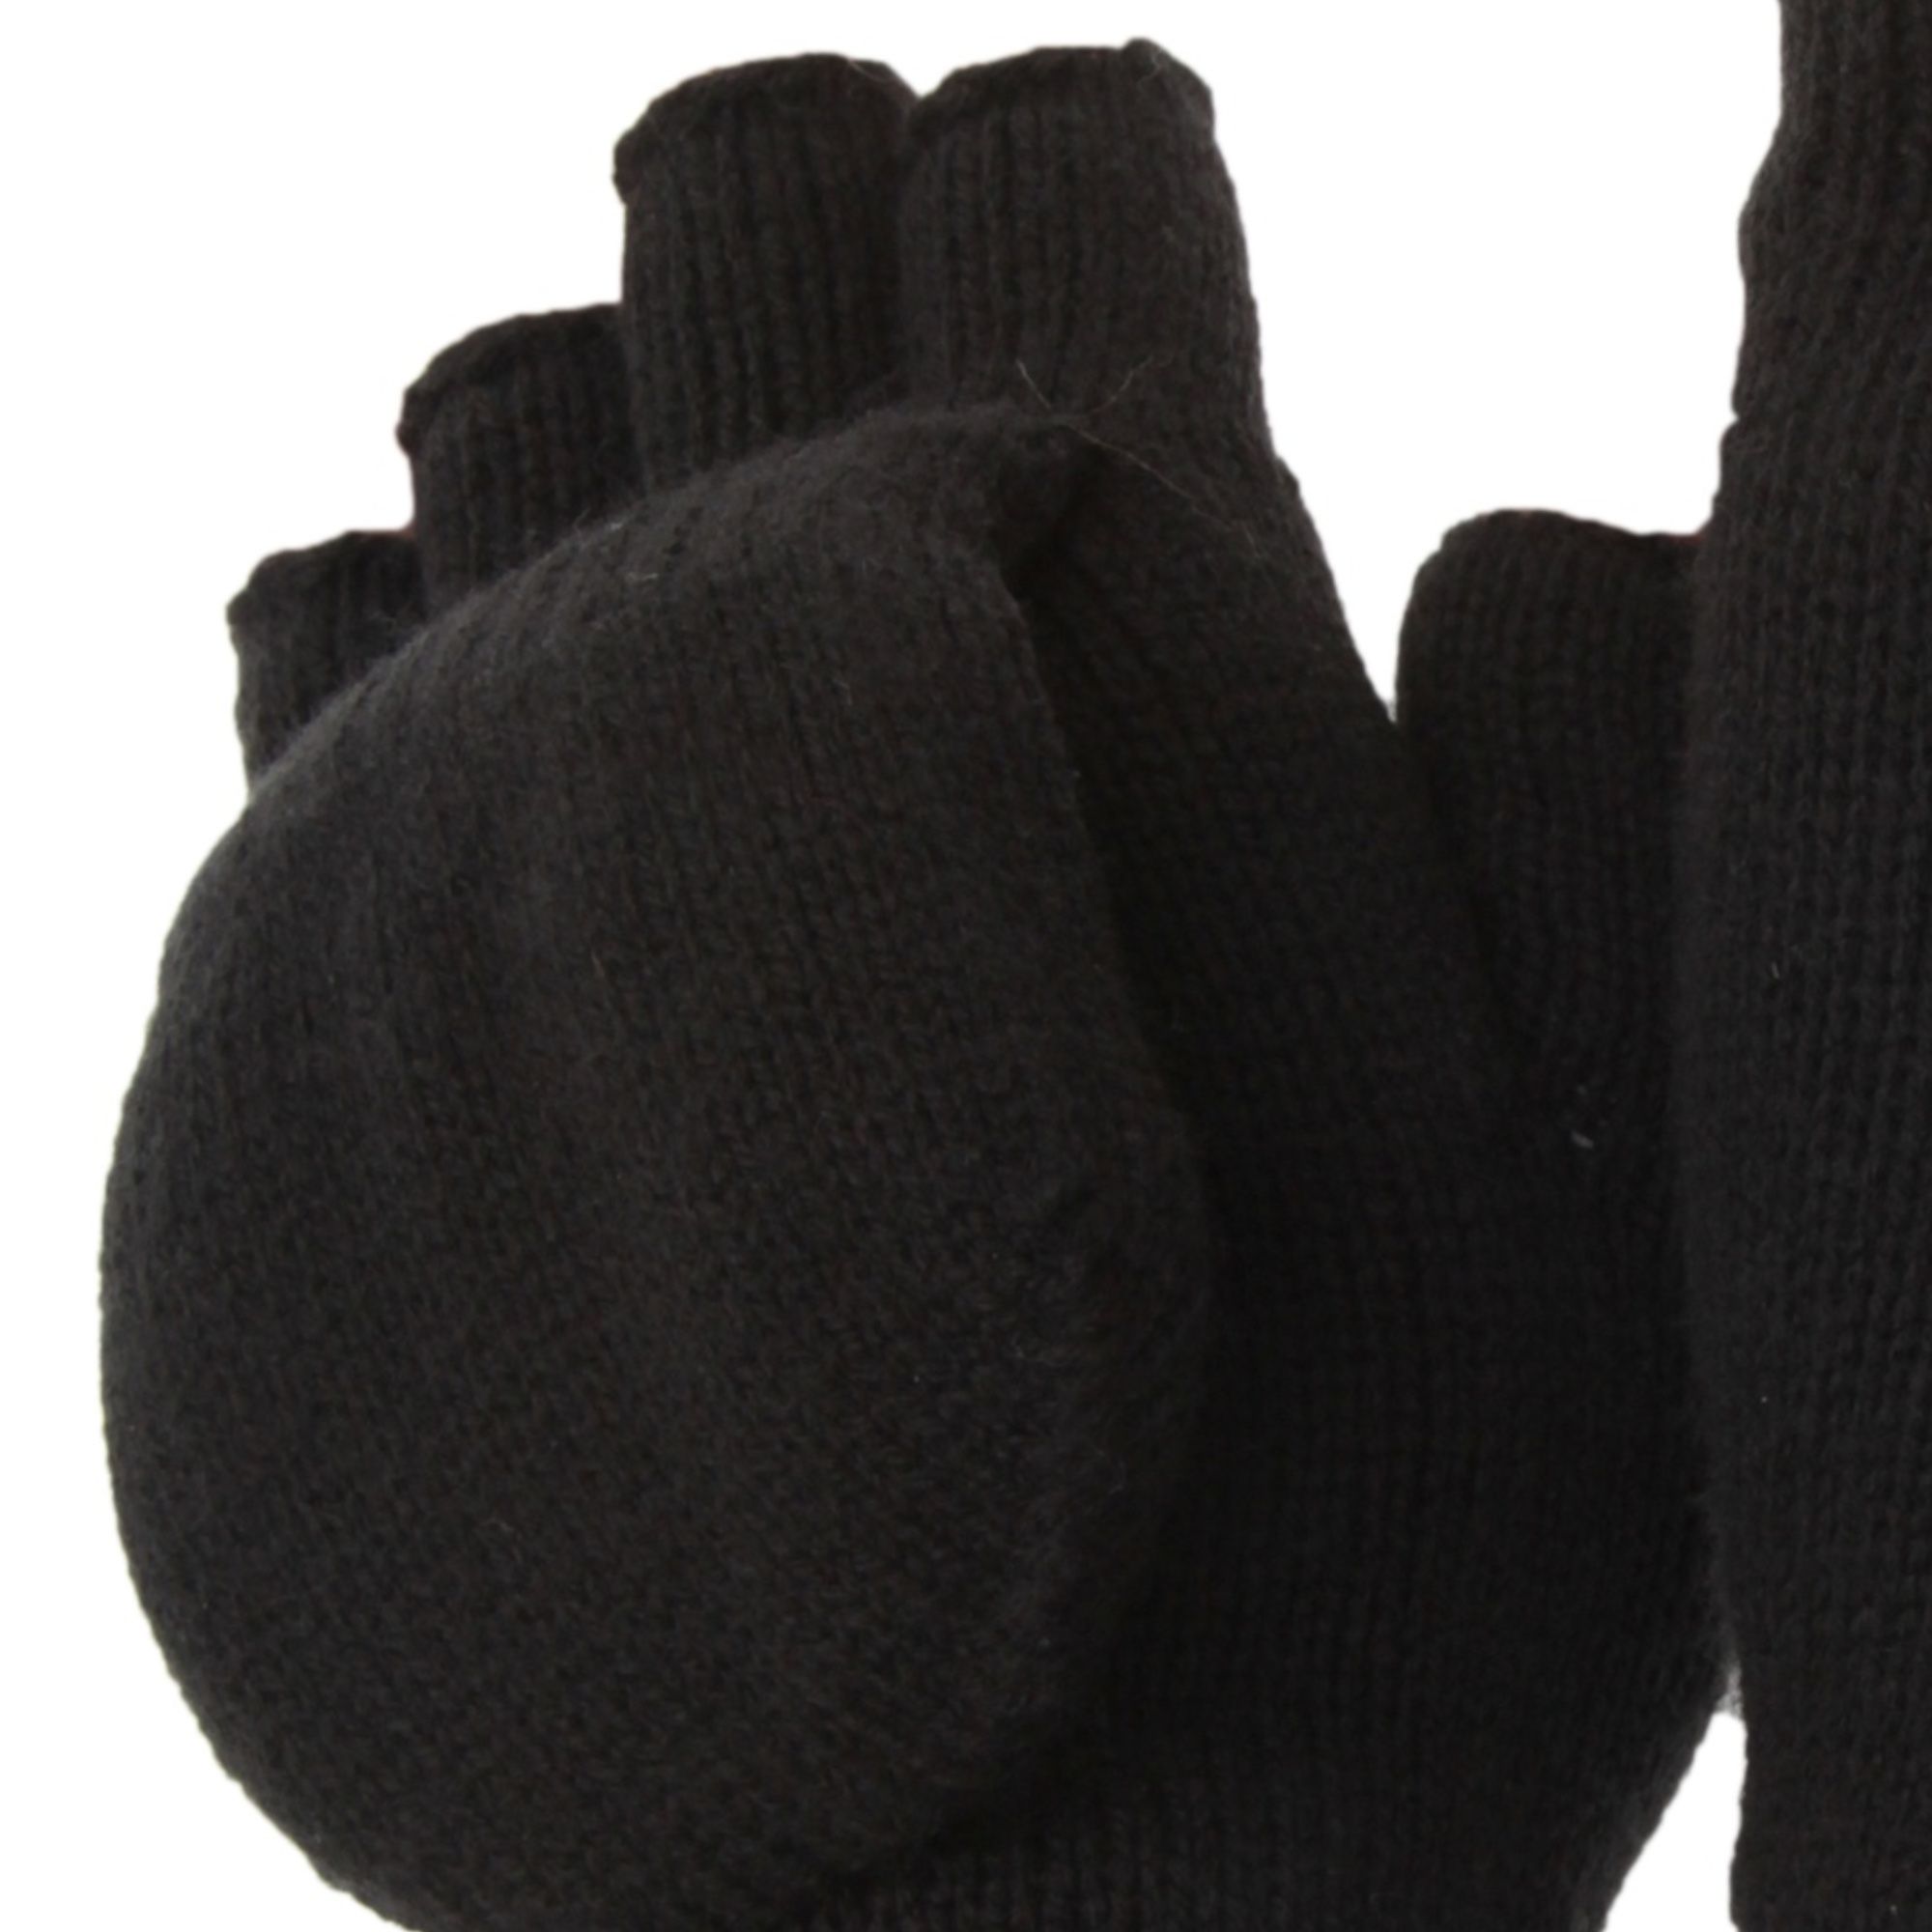 Great quality gloves. Fibre: shell 100% Acrylic. Lining 100% Polyester. Hand wash only. Ideal for wearing in the cold weather. Keeps your hands nice and warm. The gloves are capped so it can be pulled over to cover the fingers.